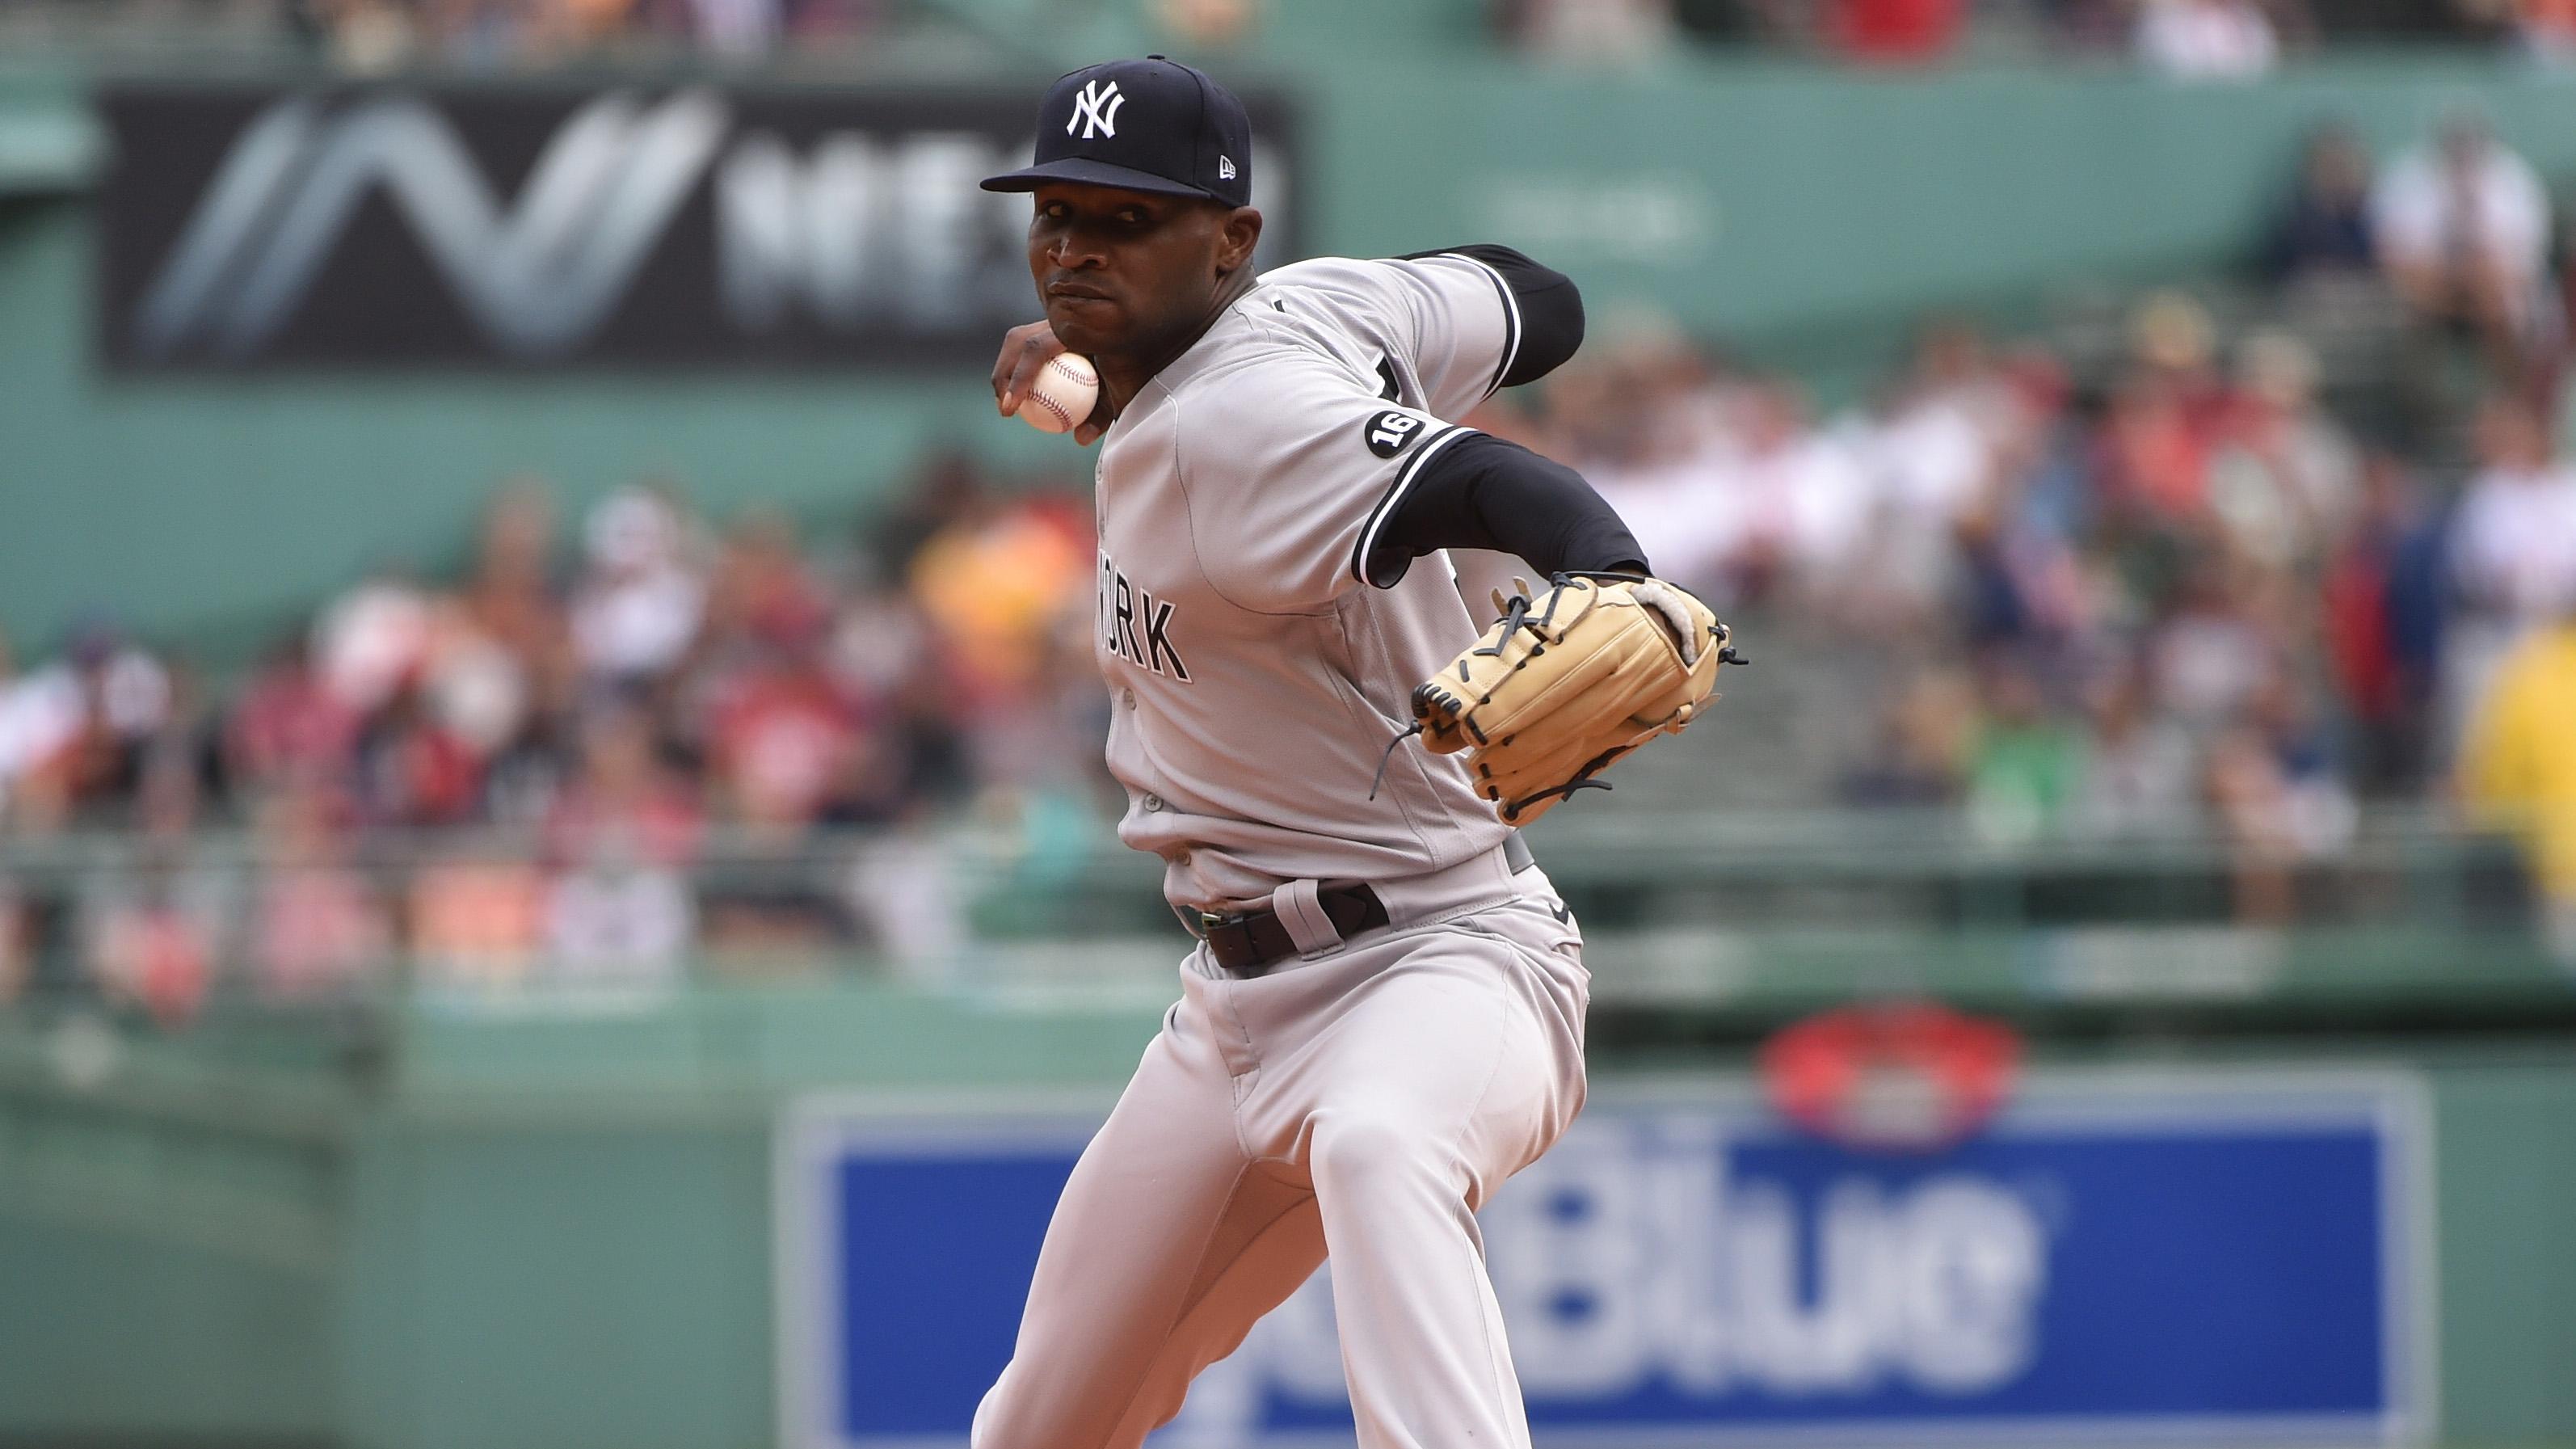 New York Yankees starting pitcher Domingo German (55) pitches during the first inning against the Boston Red Sox at Fenway Park. / Bob DeChiara-USA TODAY Sports